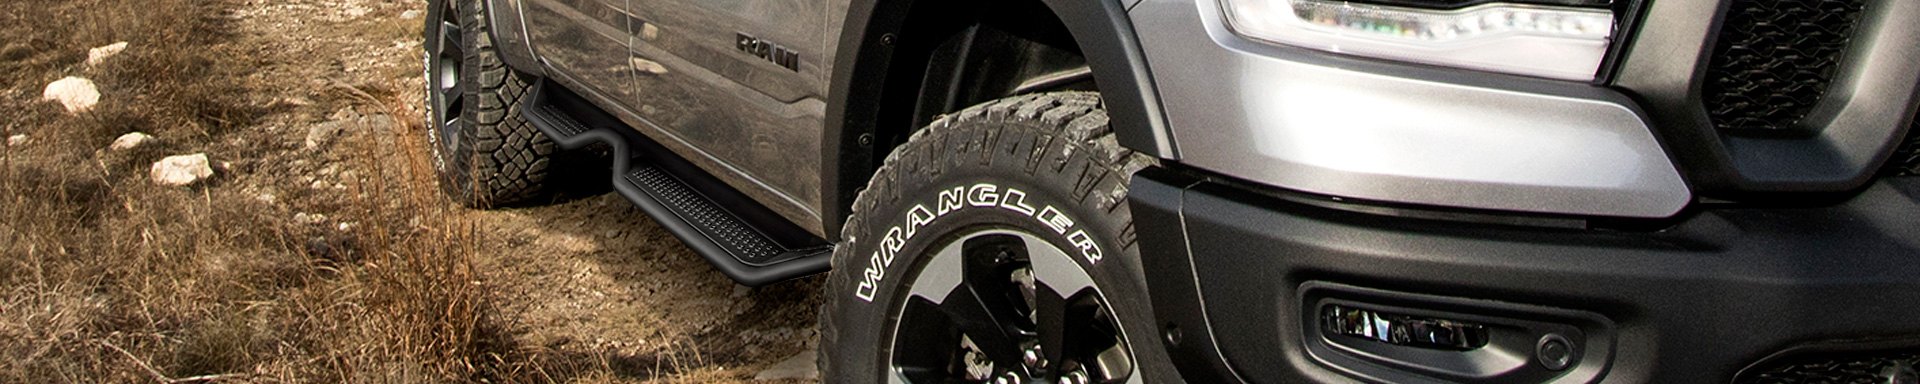 SteelCraft HD Series Step Boards Are Now Available for the Latest Generation of Ram Trucks